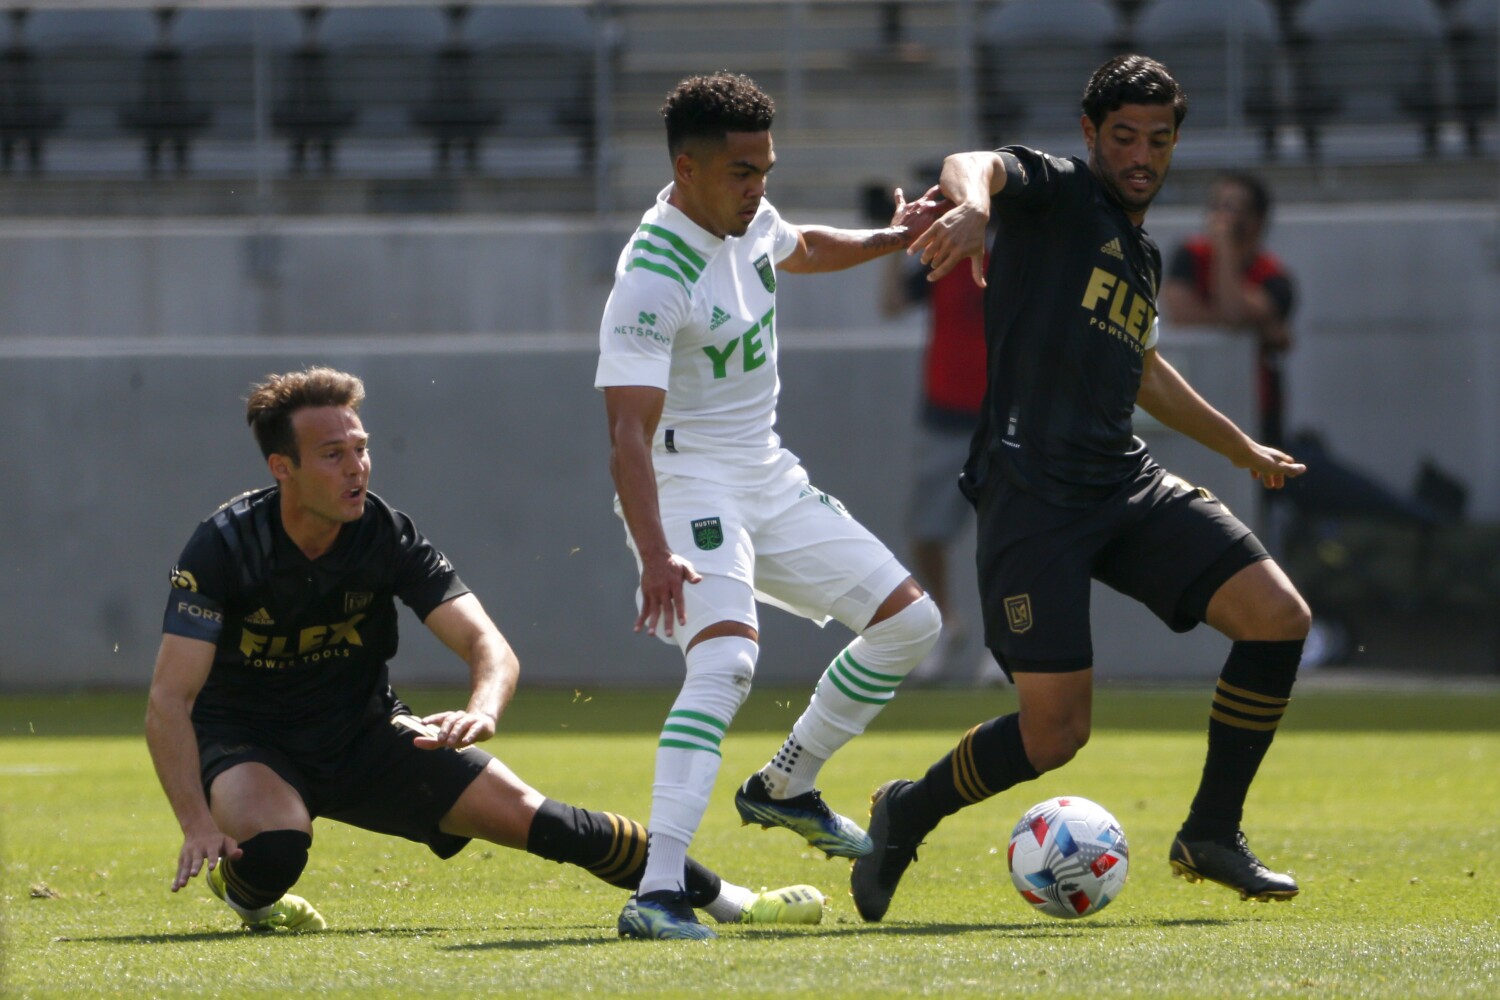 No decision yet on whether Carlos Vela will return to LAFC lineup vs. Rapids